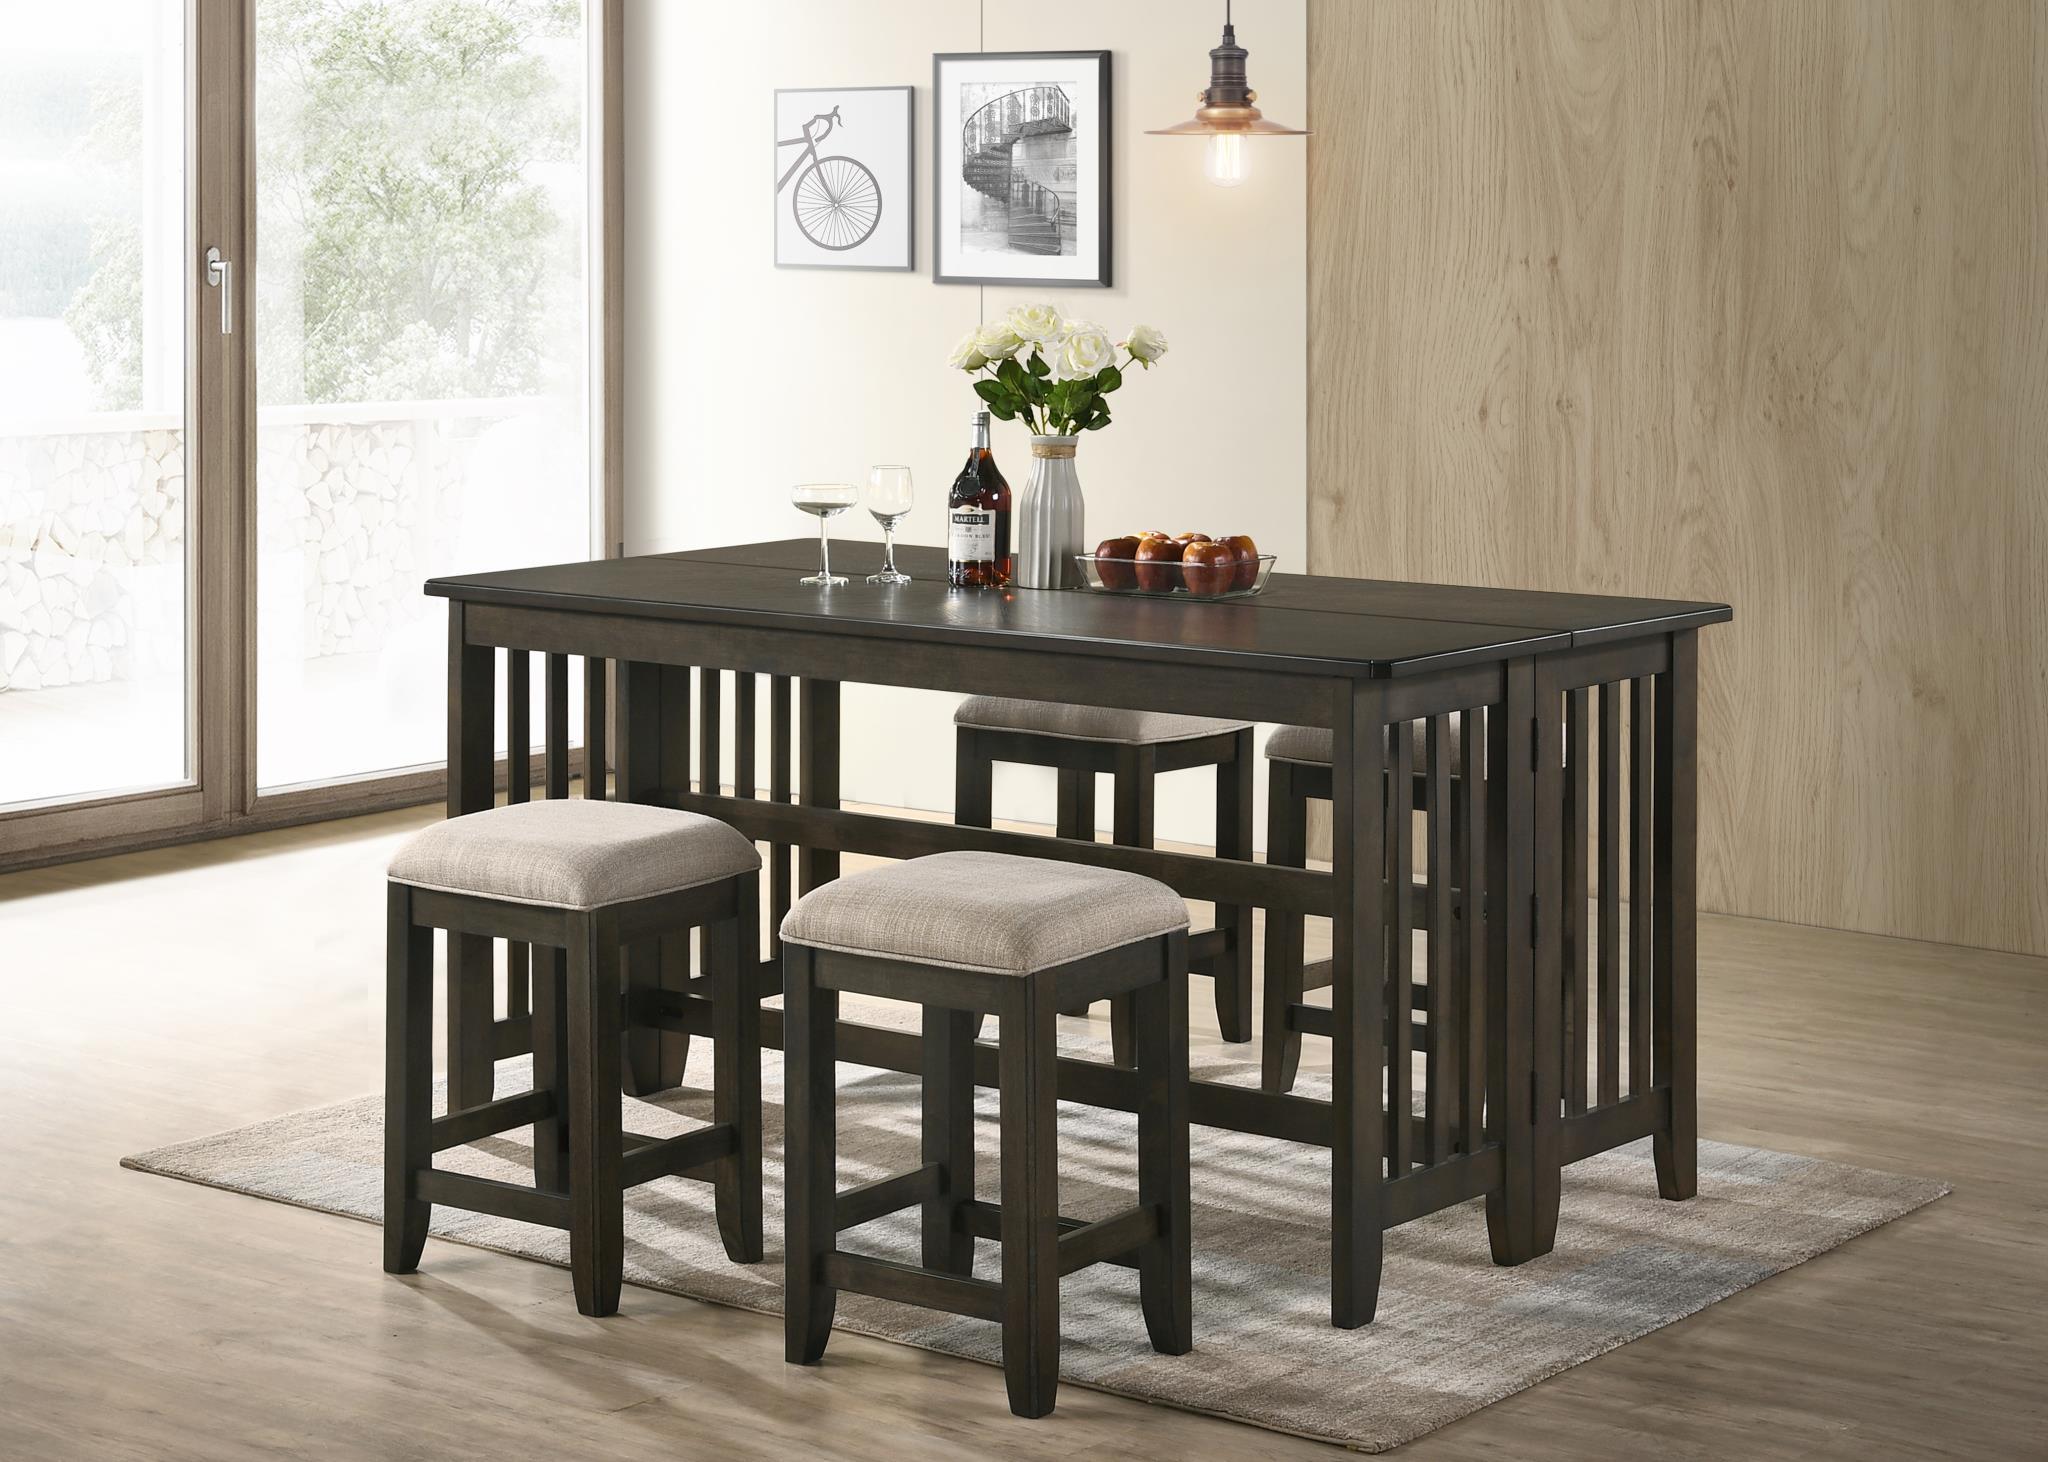 Transitional, Farmhouse Counter Table Set LINDSEY 5944-532 5944-532 in Brown, Beige 